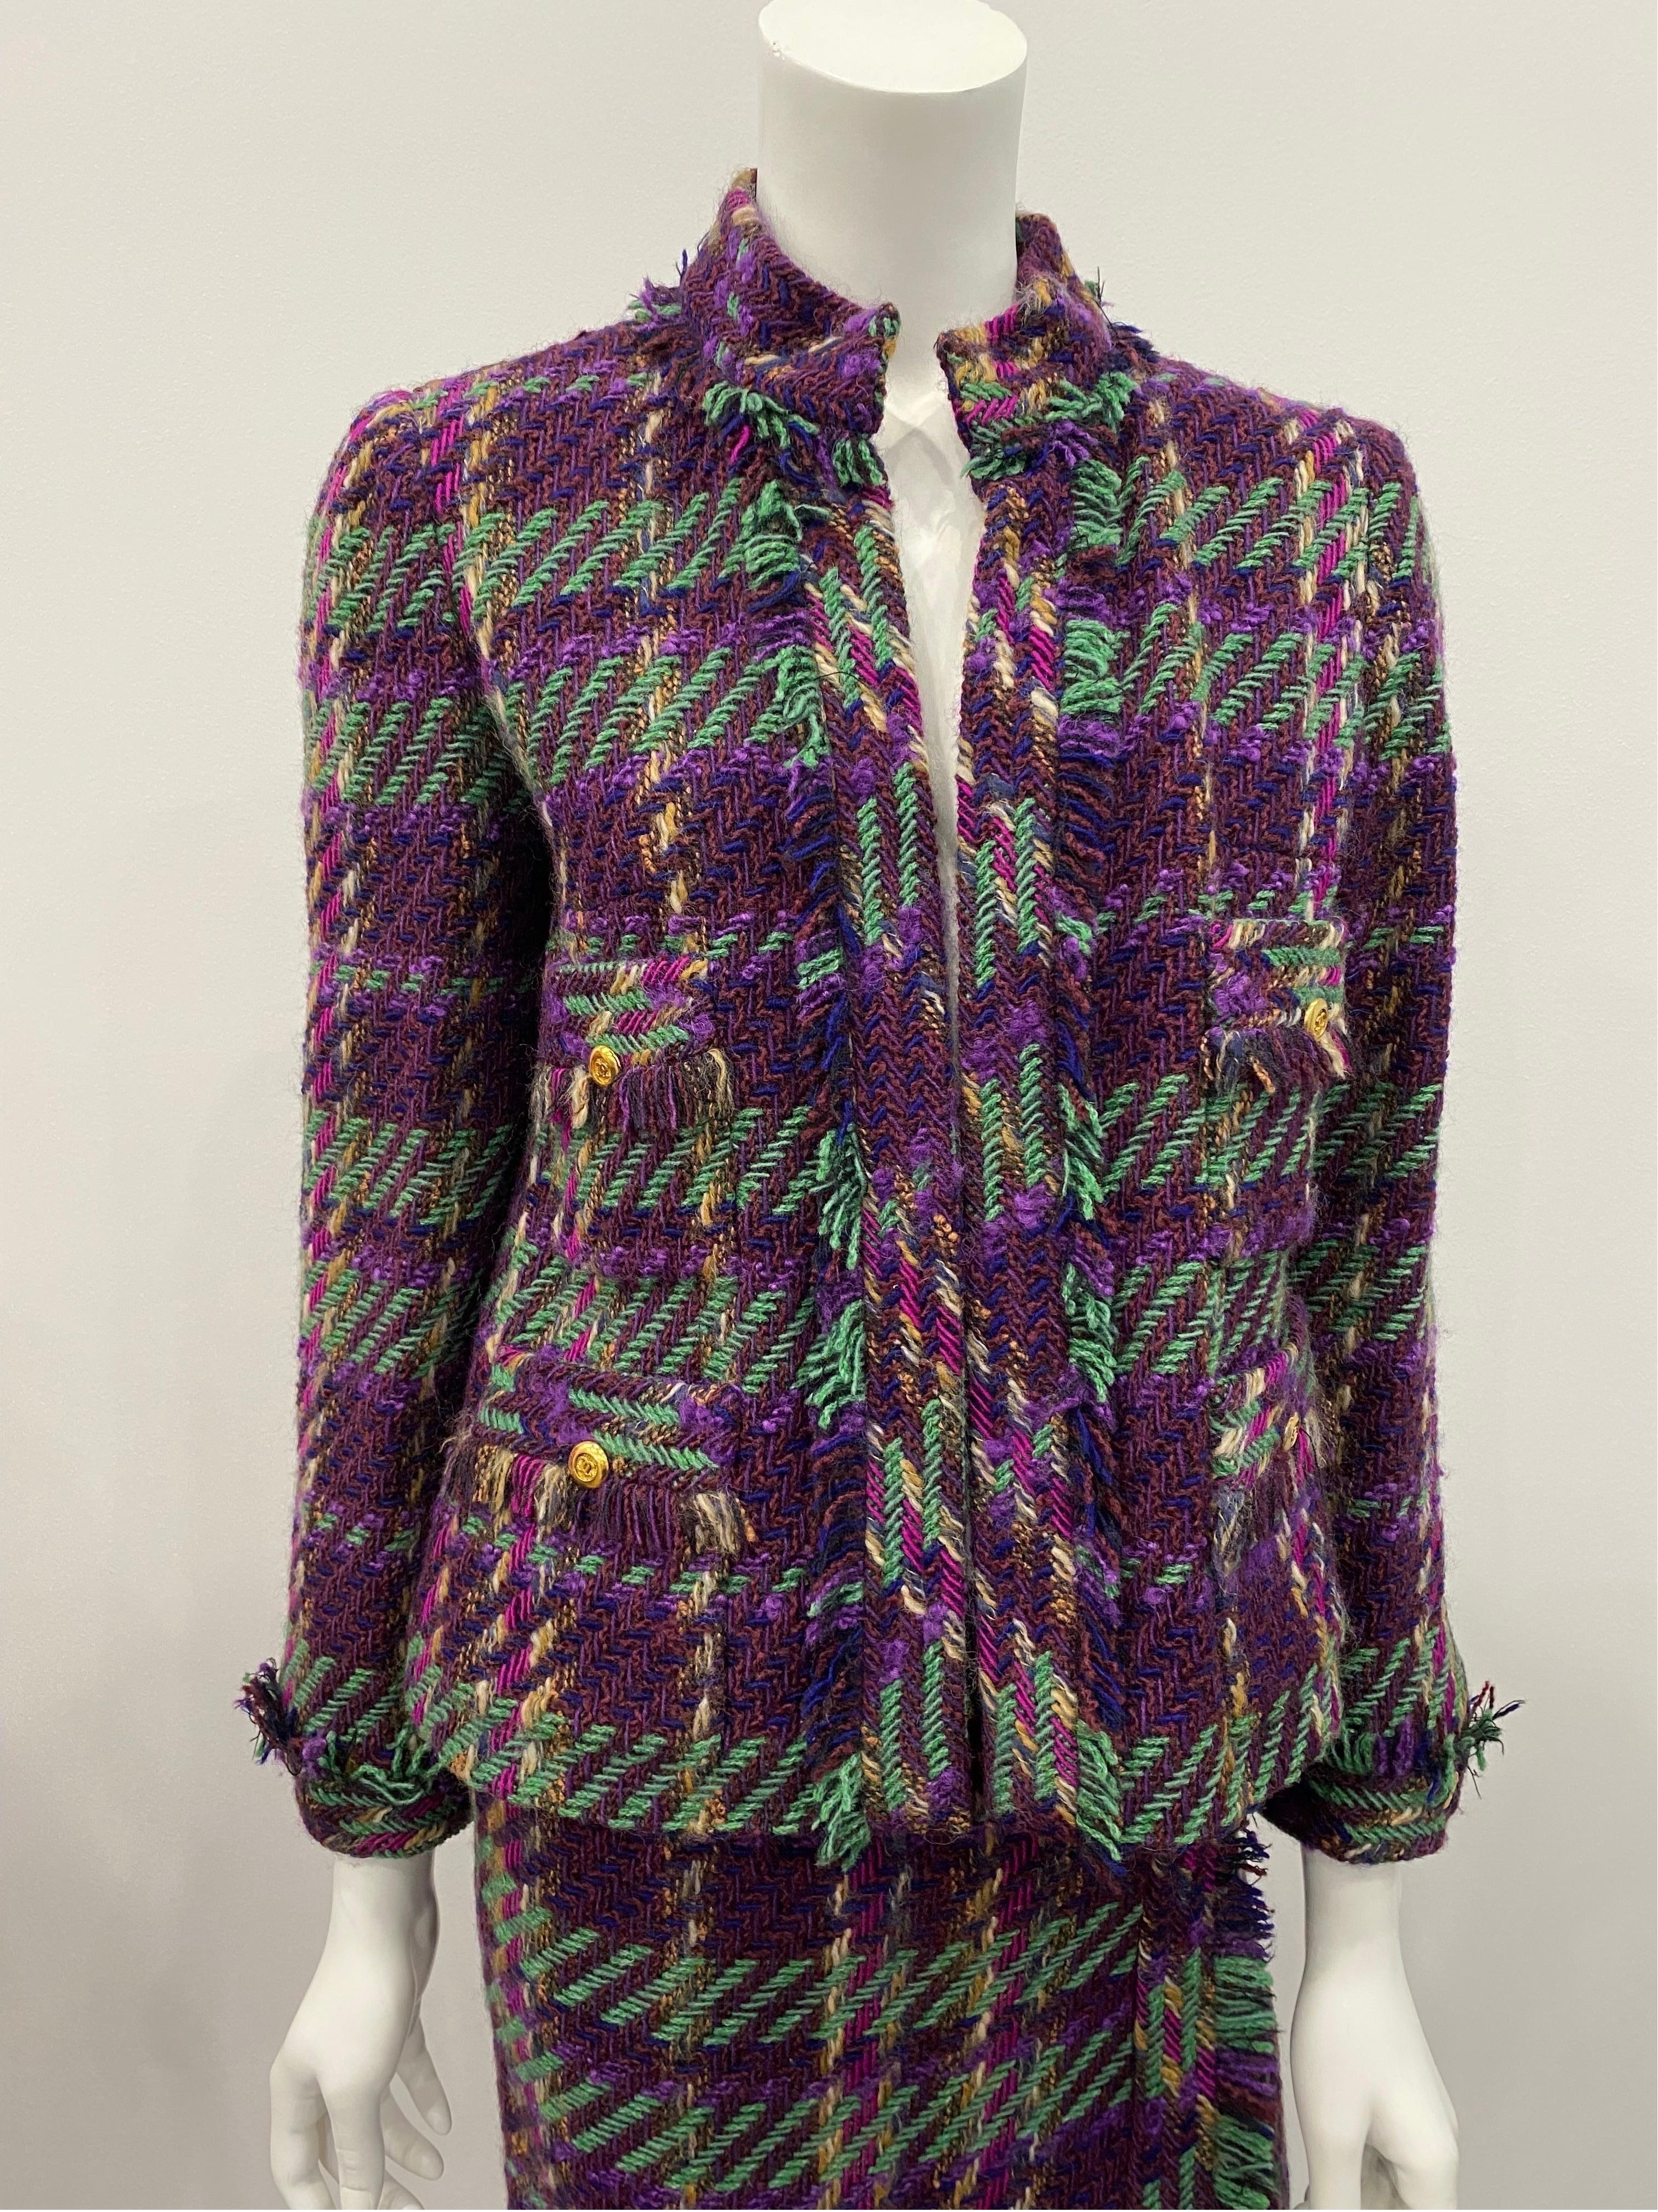 Chanel 1990's Multi Wool Tweed Skirt Suit - Sz 38  This gorgeous vintage jacket has fringe all around the trim of the jacket, there are 4 front patch packets with 4 gold buttons, each sleeve has a cuff with fringe trim with one gold button as well.